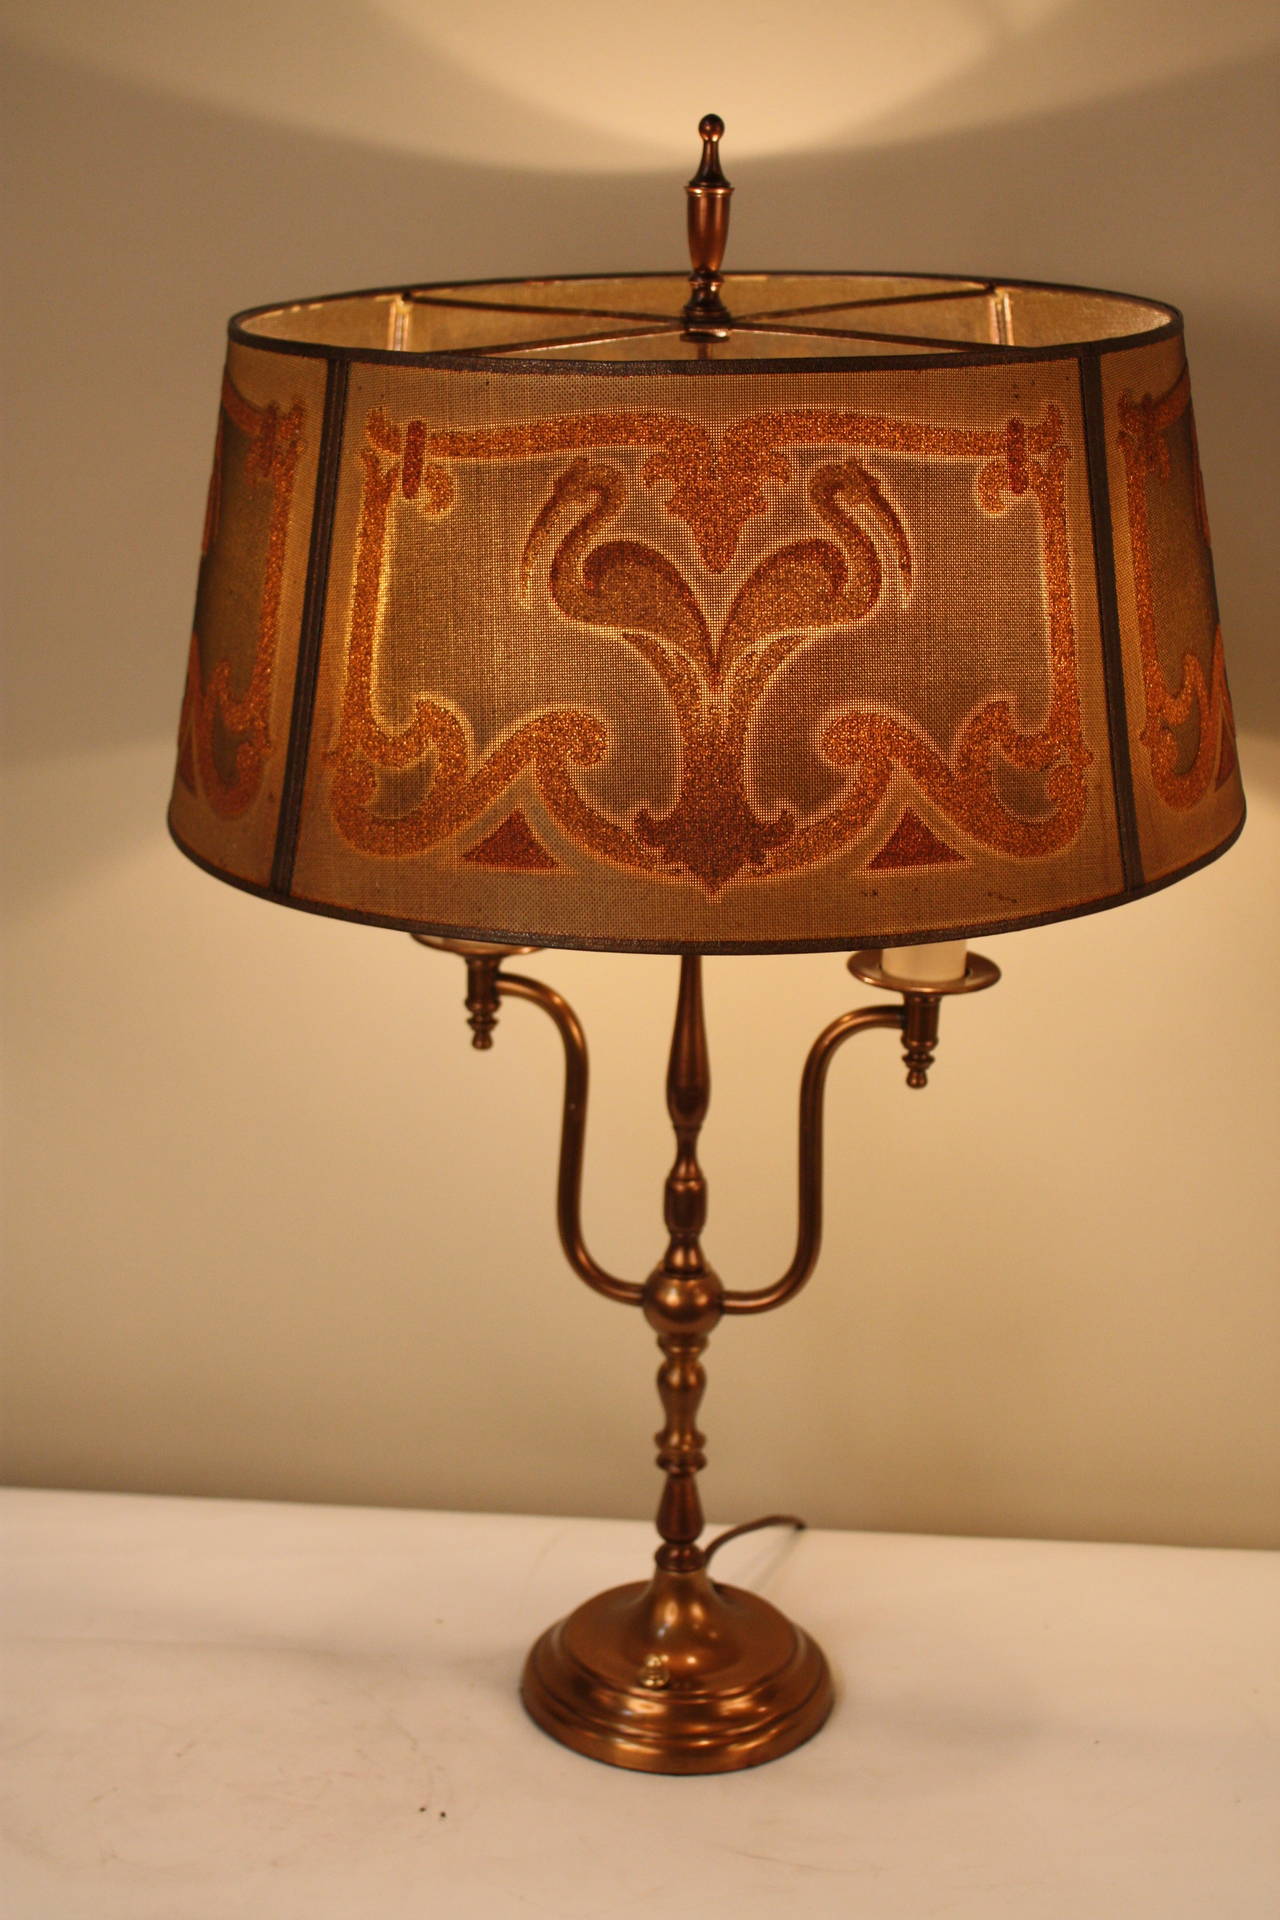 This wonderful 1930s table lamp is truly fabulous, featuring painted metal mesh shades and an antique finished brass base. The tapestry mesh shade is by the Mutual Sunset Lamp Co. of New York. A Classic American lamp maker. 
The diameter is 16.25